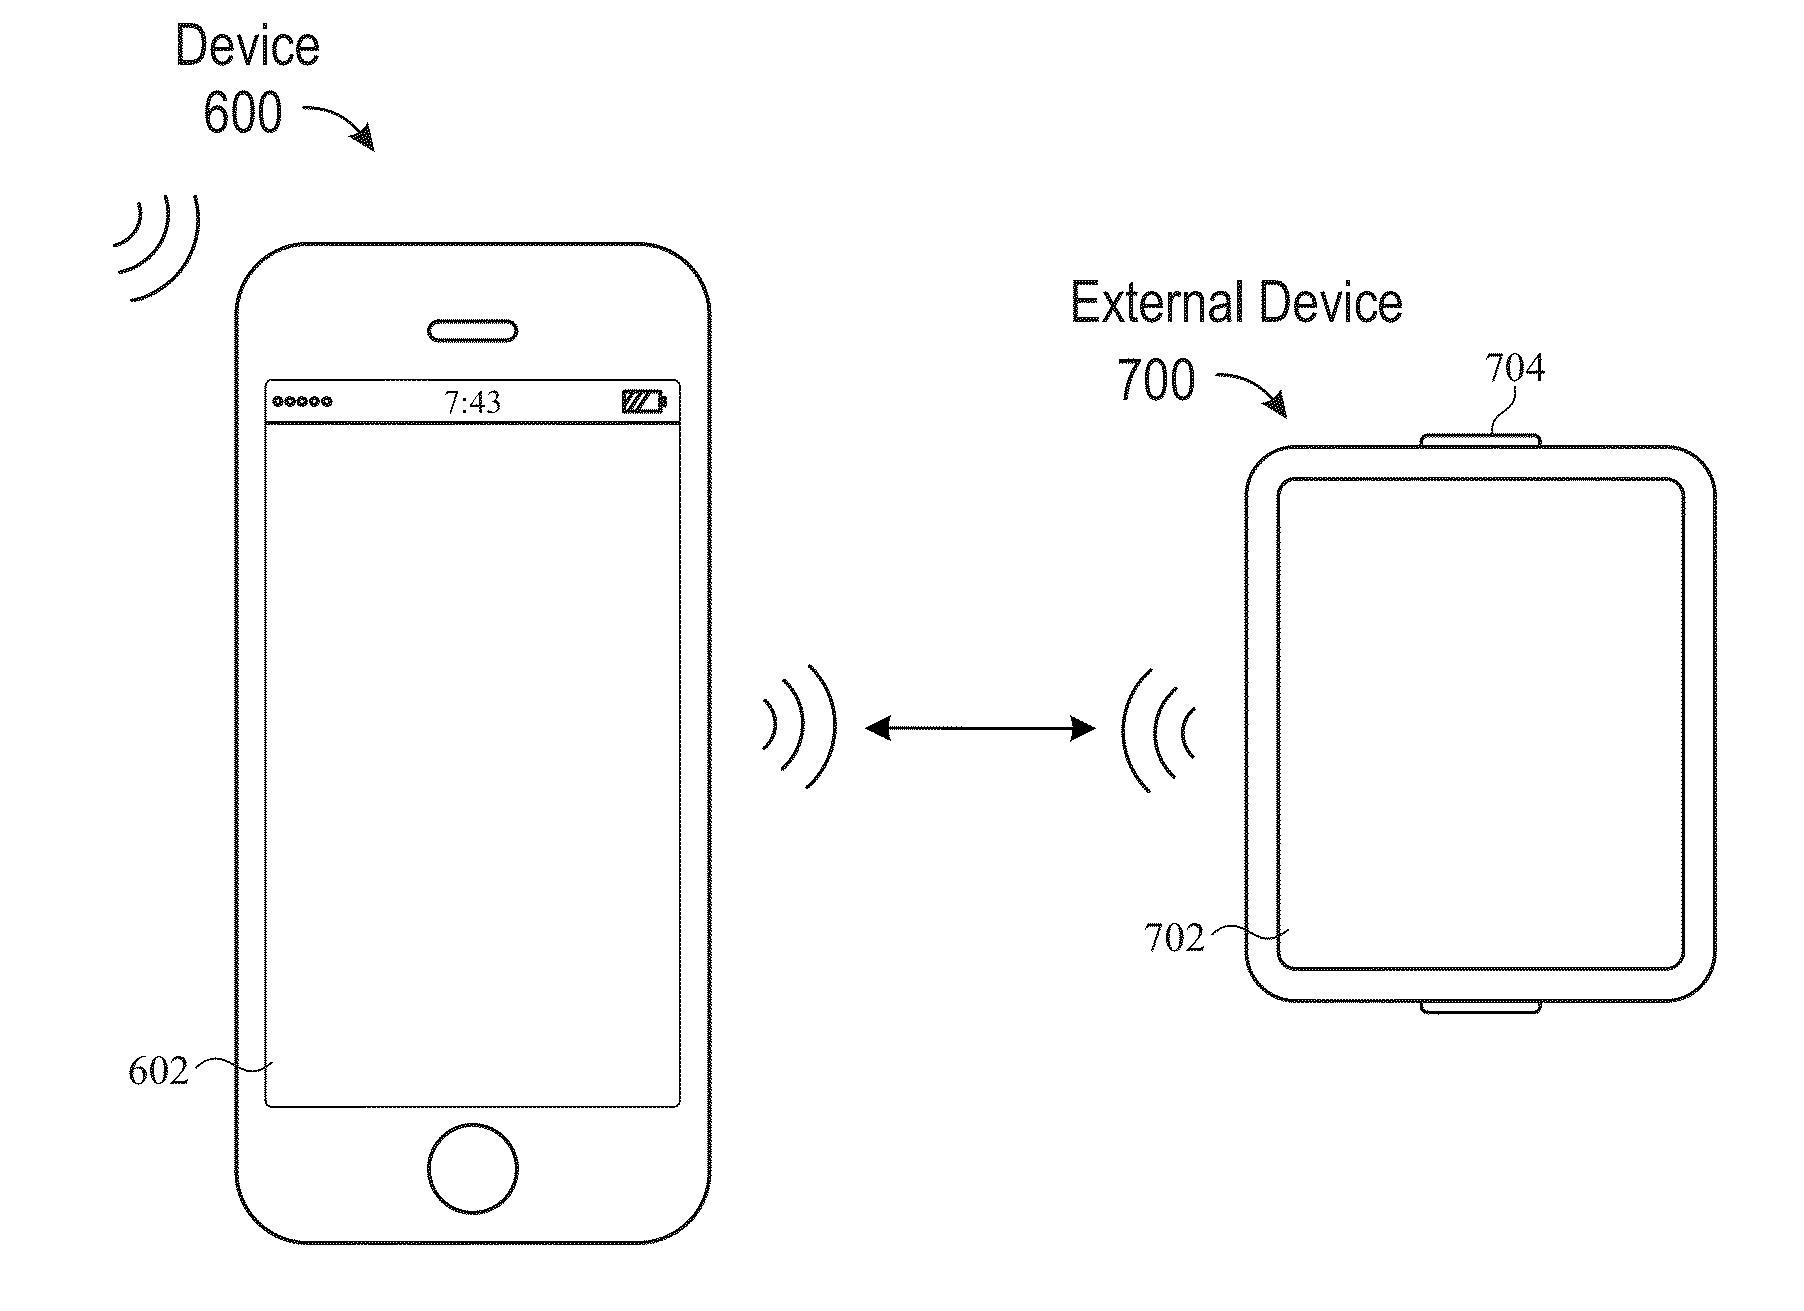 Device configuration user interface